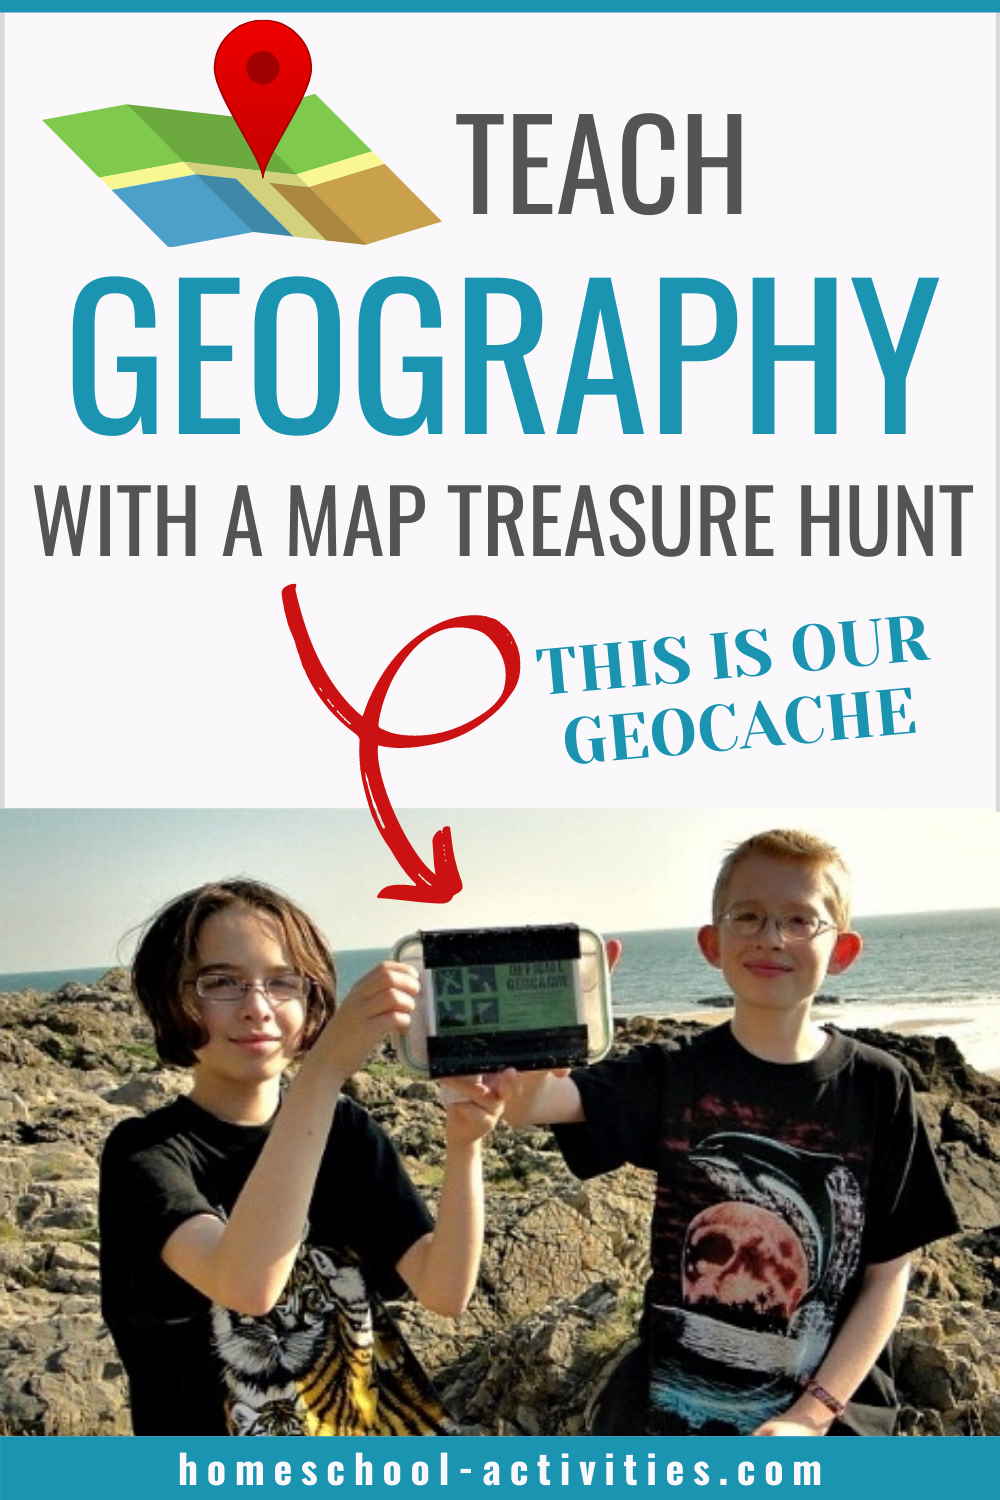 Teaching geography with geocaching